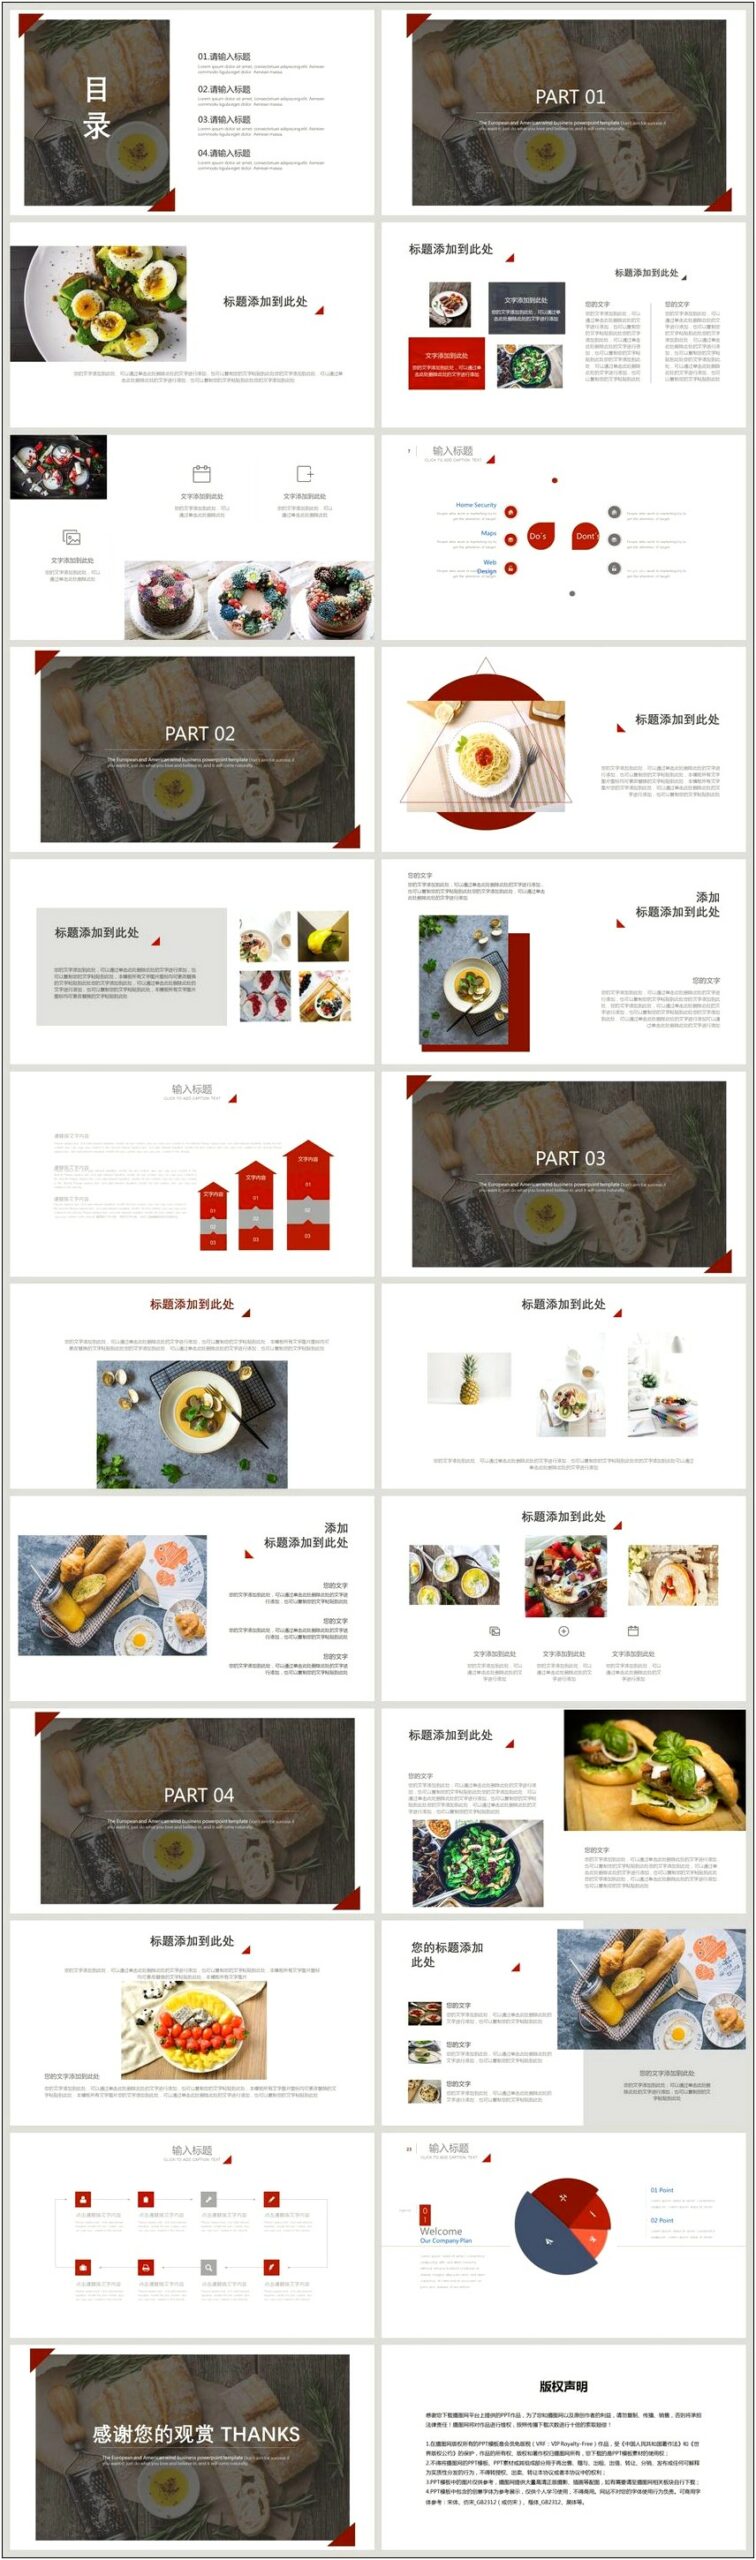 Food And Beverage Powerpoint Templates Free Download